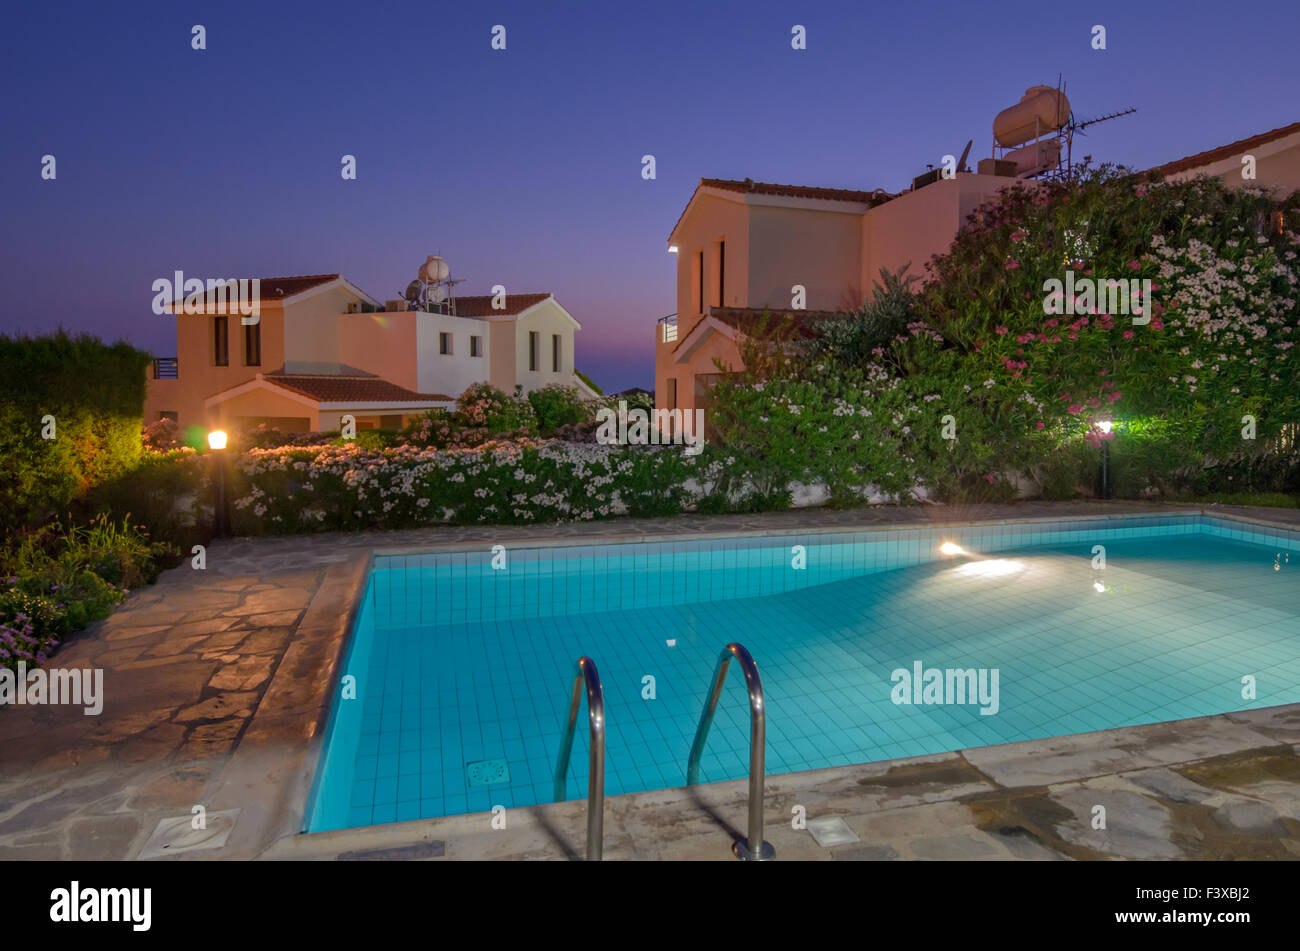 Holiday villas with pool Stock Photo